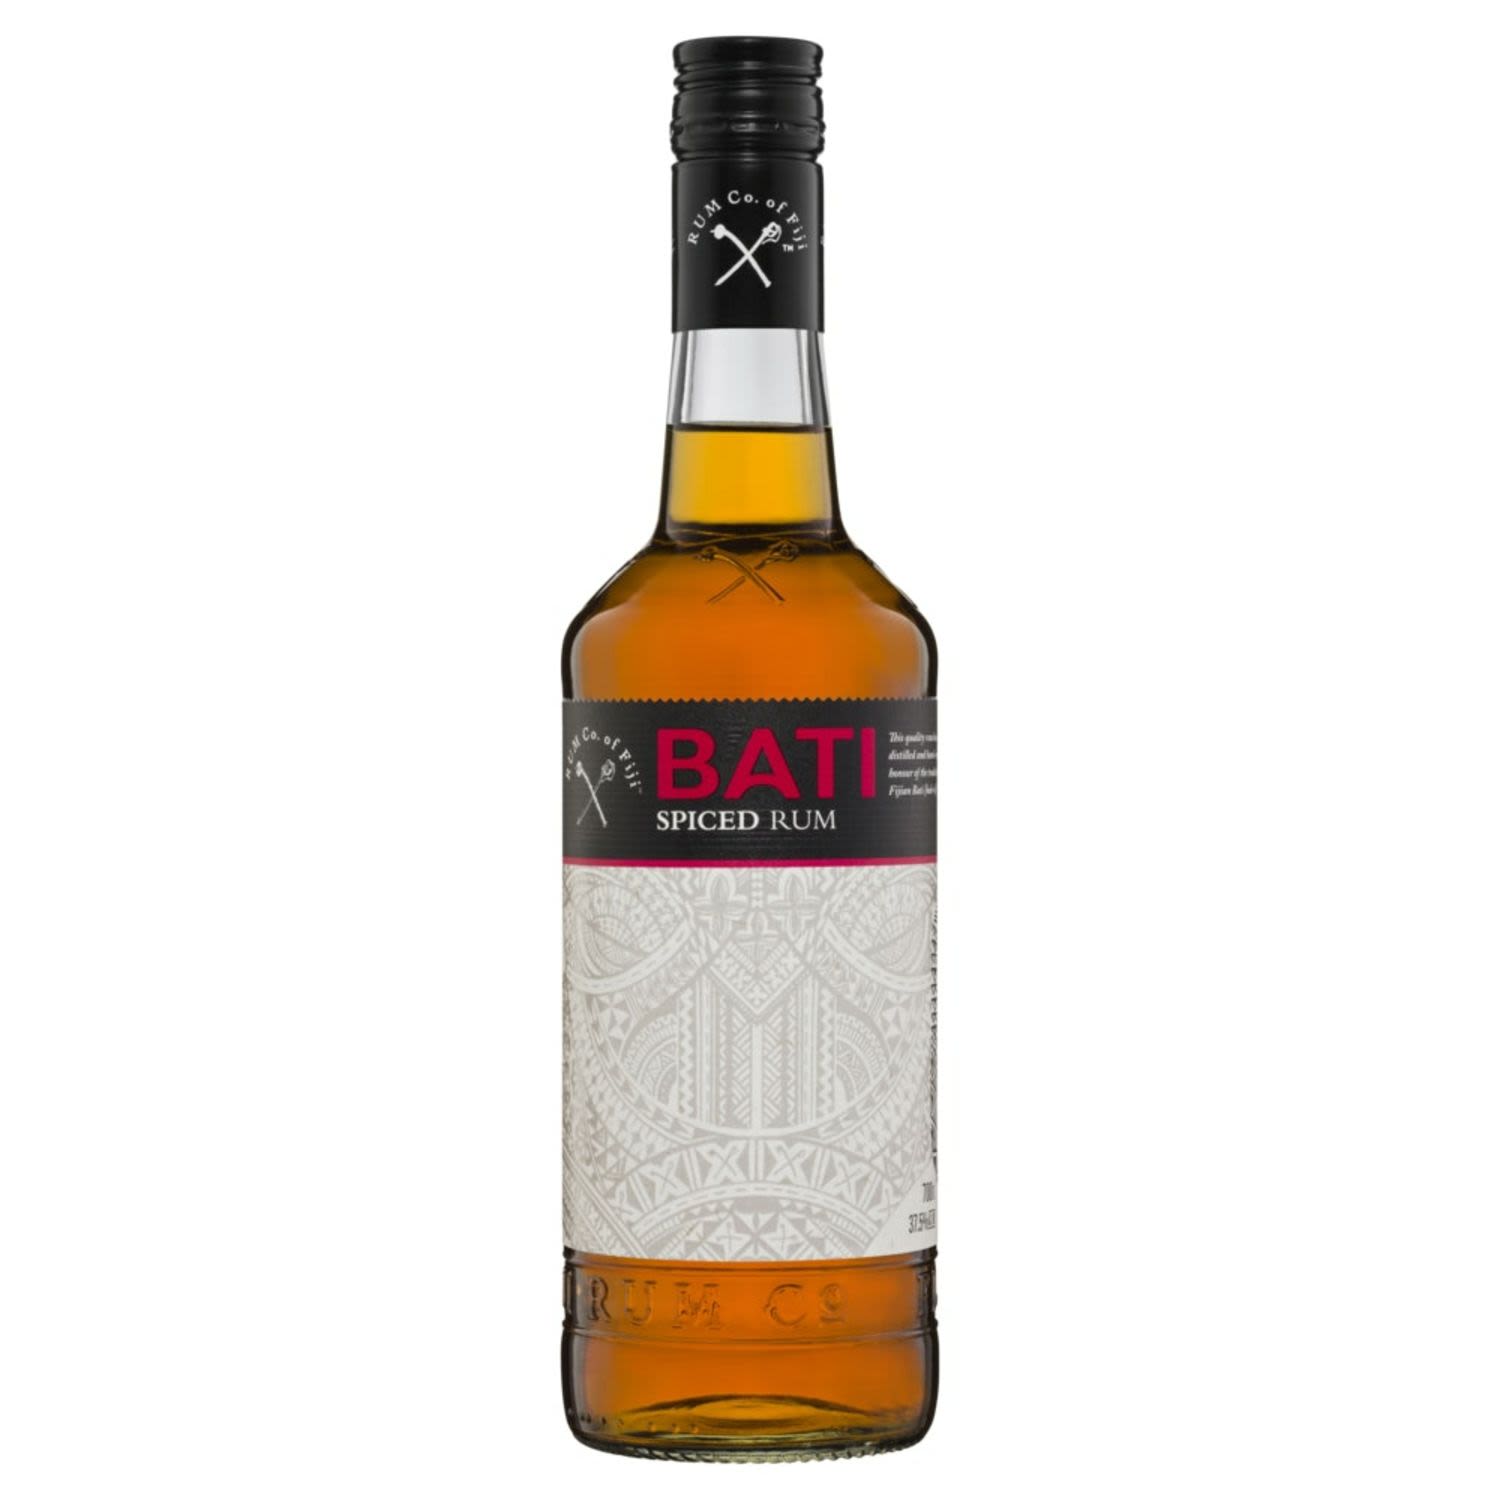 This award winning BATI rum have been proudly distilled by RUM Co of Fiji. Handcrafted with the finest local ingredients, and filtered through a unique coconut shell carbon, these premium rums provide a deliciously smooth, and distinctively clean taste. BATI should be enjoyed by those who enjoy quality rum. SERVE YOUR TRIBE, HONOUR THE CHIEF. Bati [bah-ti] were the fearsome Fijian warriors and protectors of their homeland.<br /> <br />Alcohol Volume: 37.50%<br /><br />Pack Format: 6 Pack<br /><br />Standard Drinks: 21</br /><br />Pack Type: Bottle<br /><br />Country of Origin: Fiji<br />